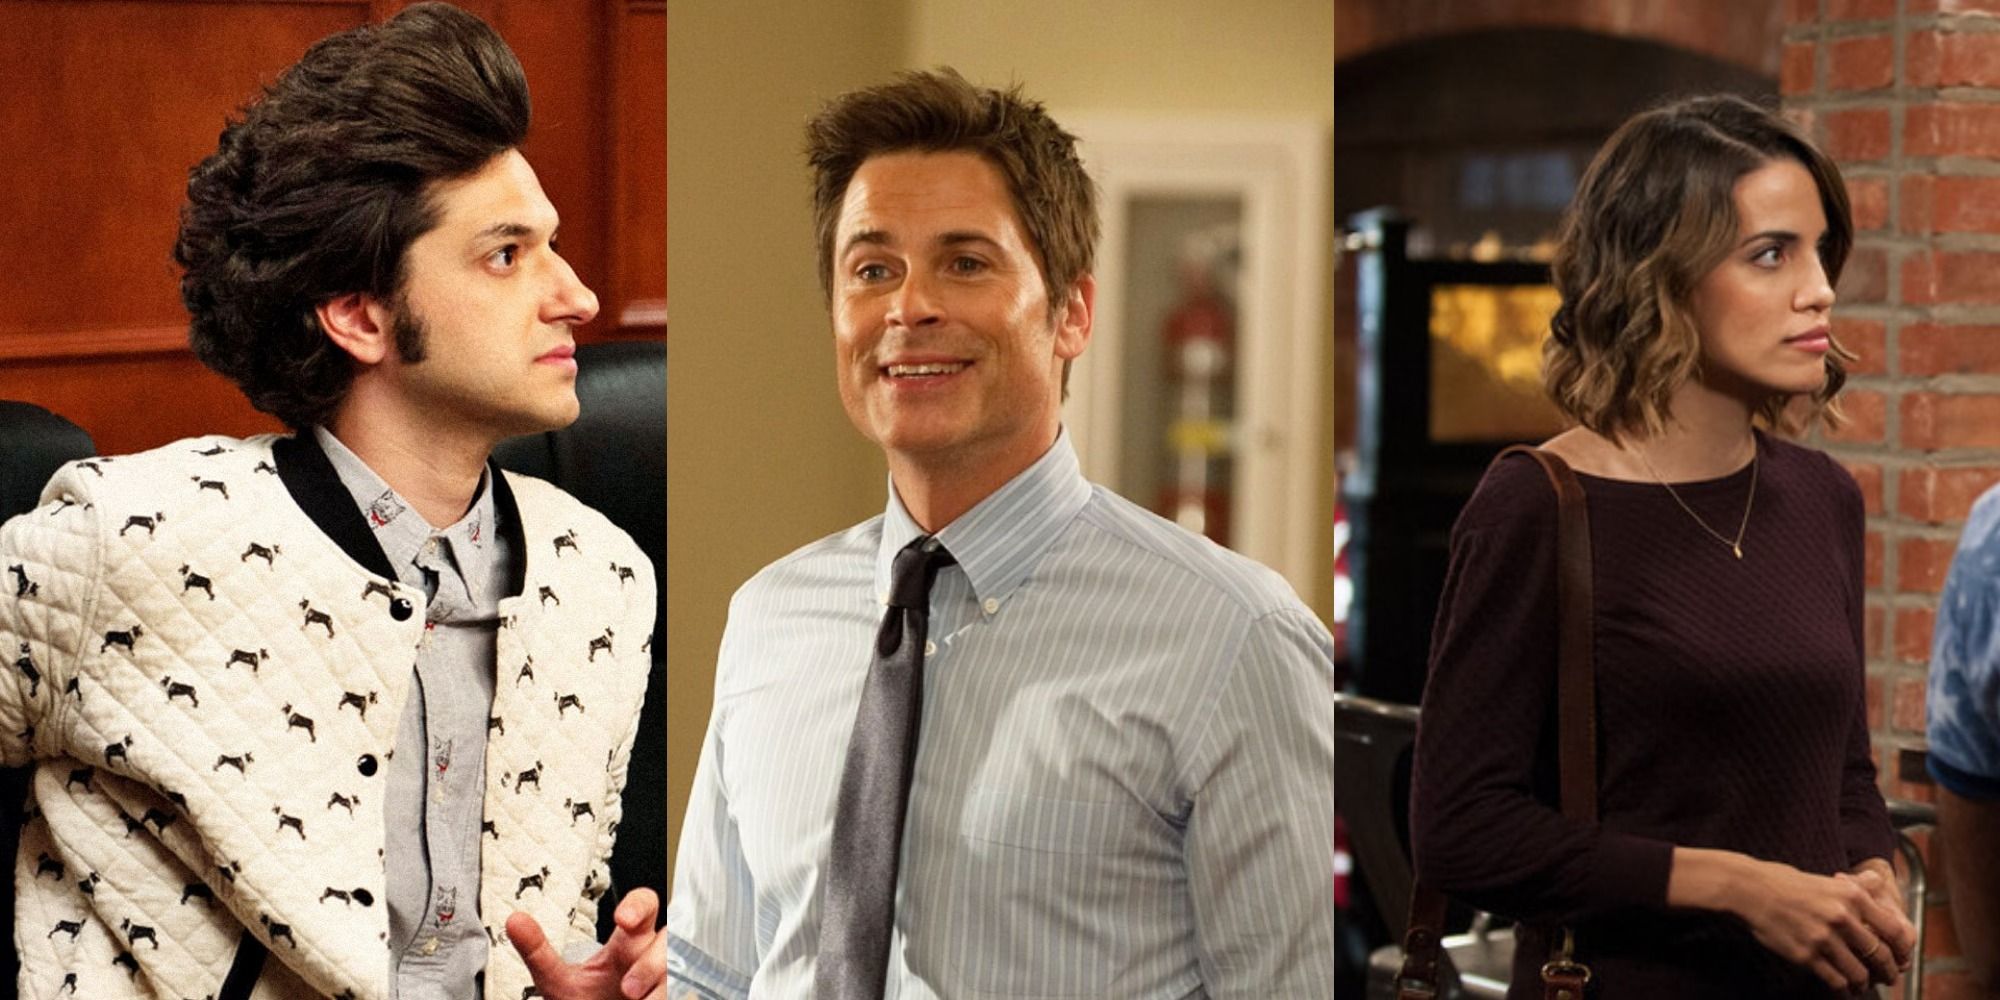 Split image of Jean Ralphio, Chris Traeger and Lucy from Parks and Recreation